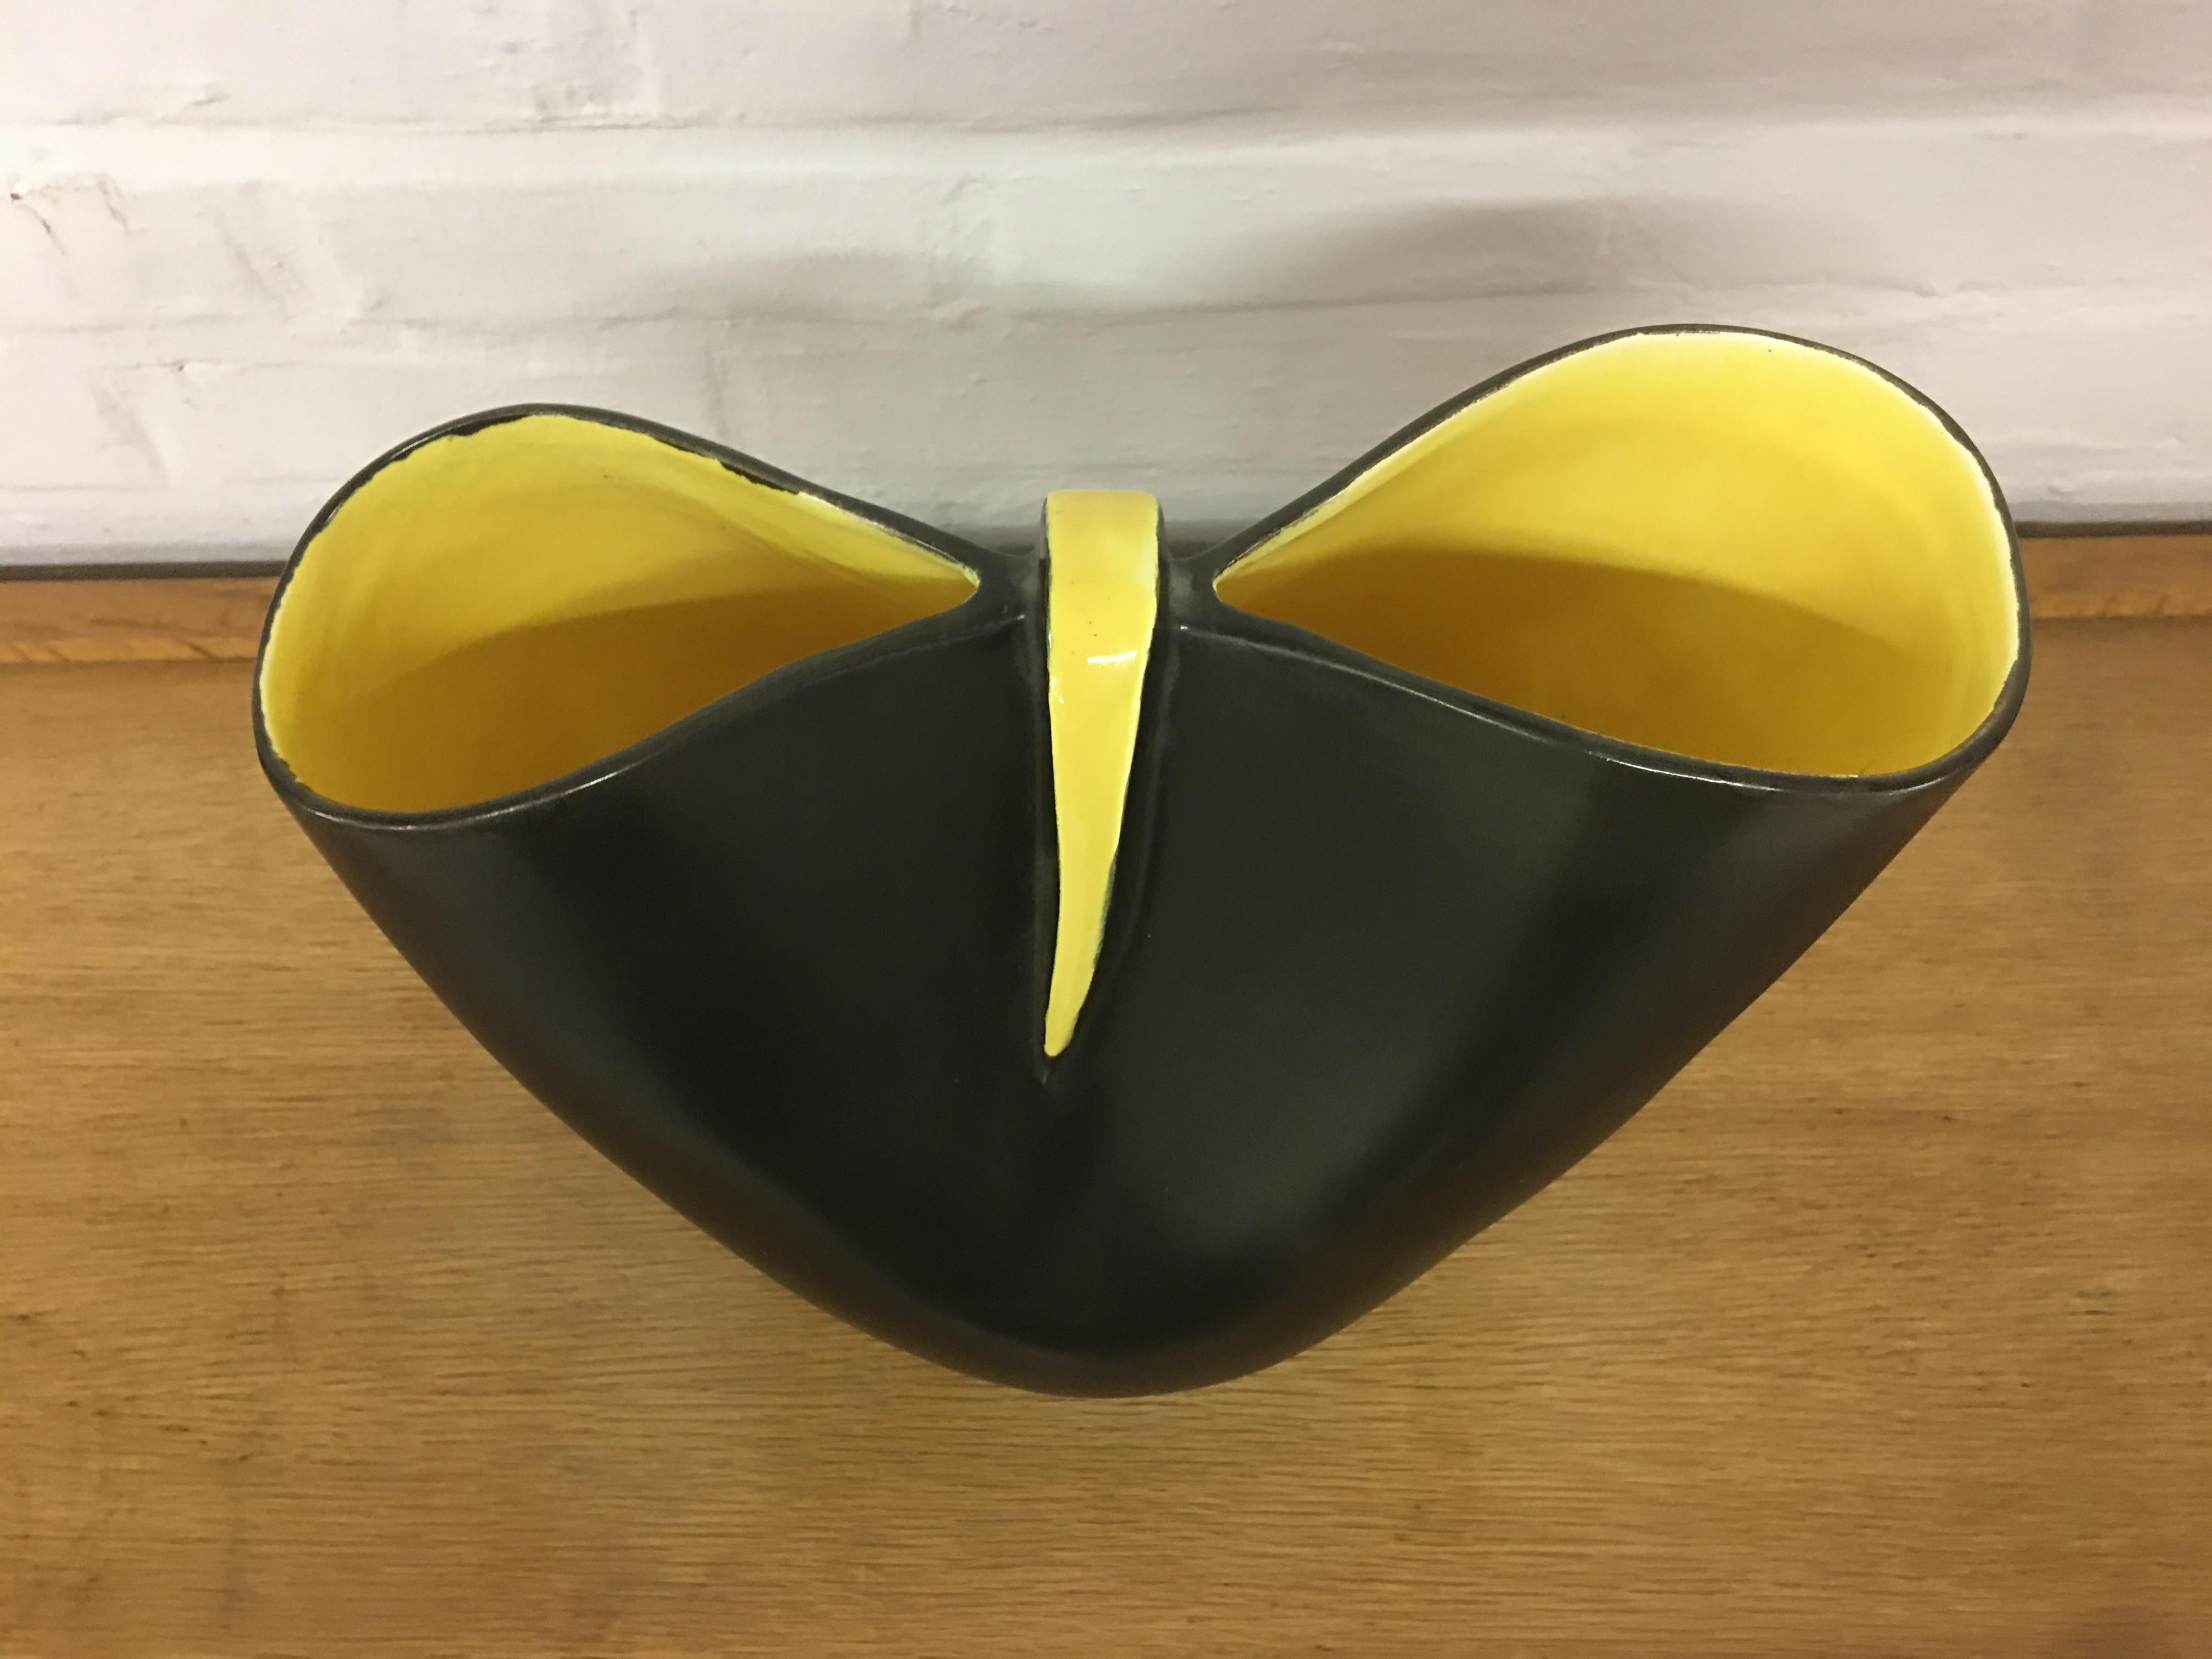 Atelier Revernay Midcentury Biomorphic Vase, circa 1950 In Good Condition For Sale In Saint-Ouen, FR